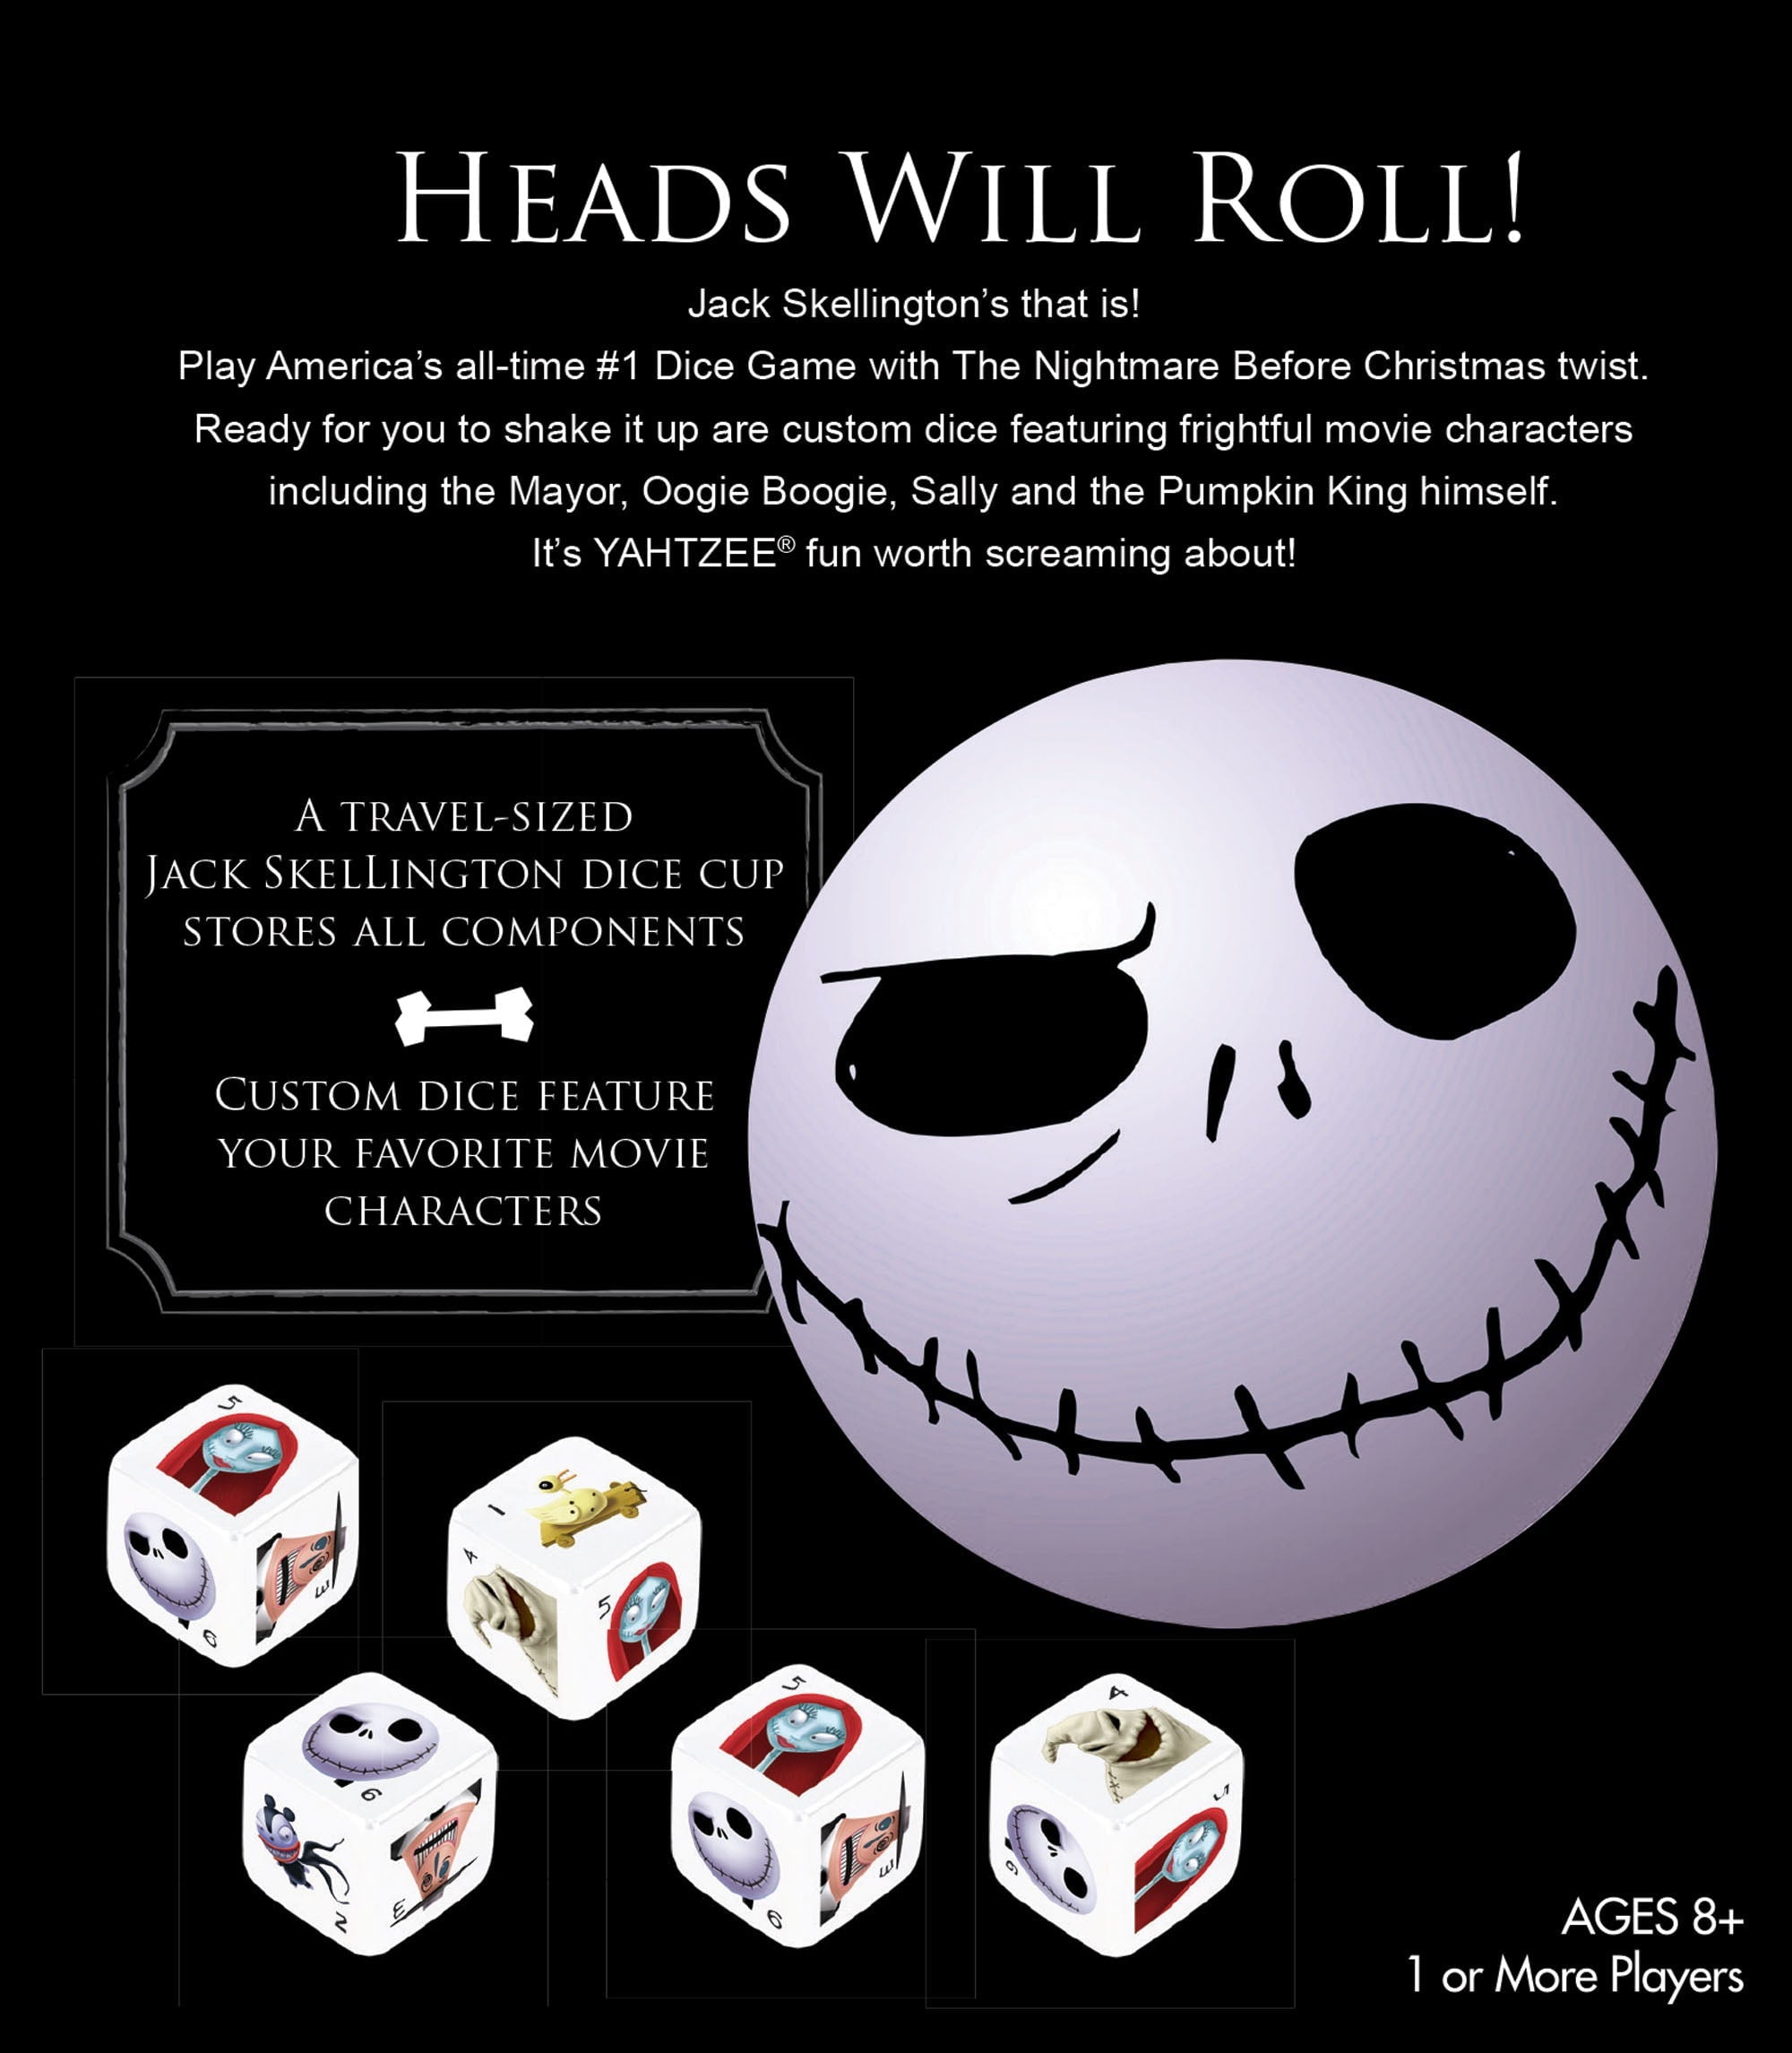 Yahtzee Dice Game - Nightmare Before Christmas Edition - Game - Chess-House